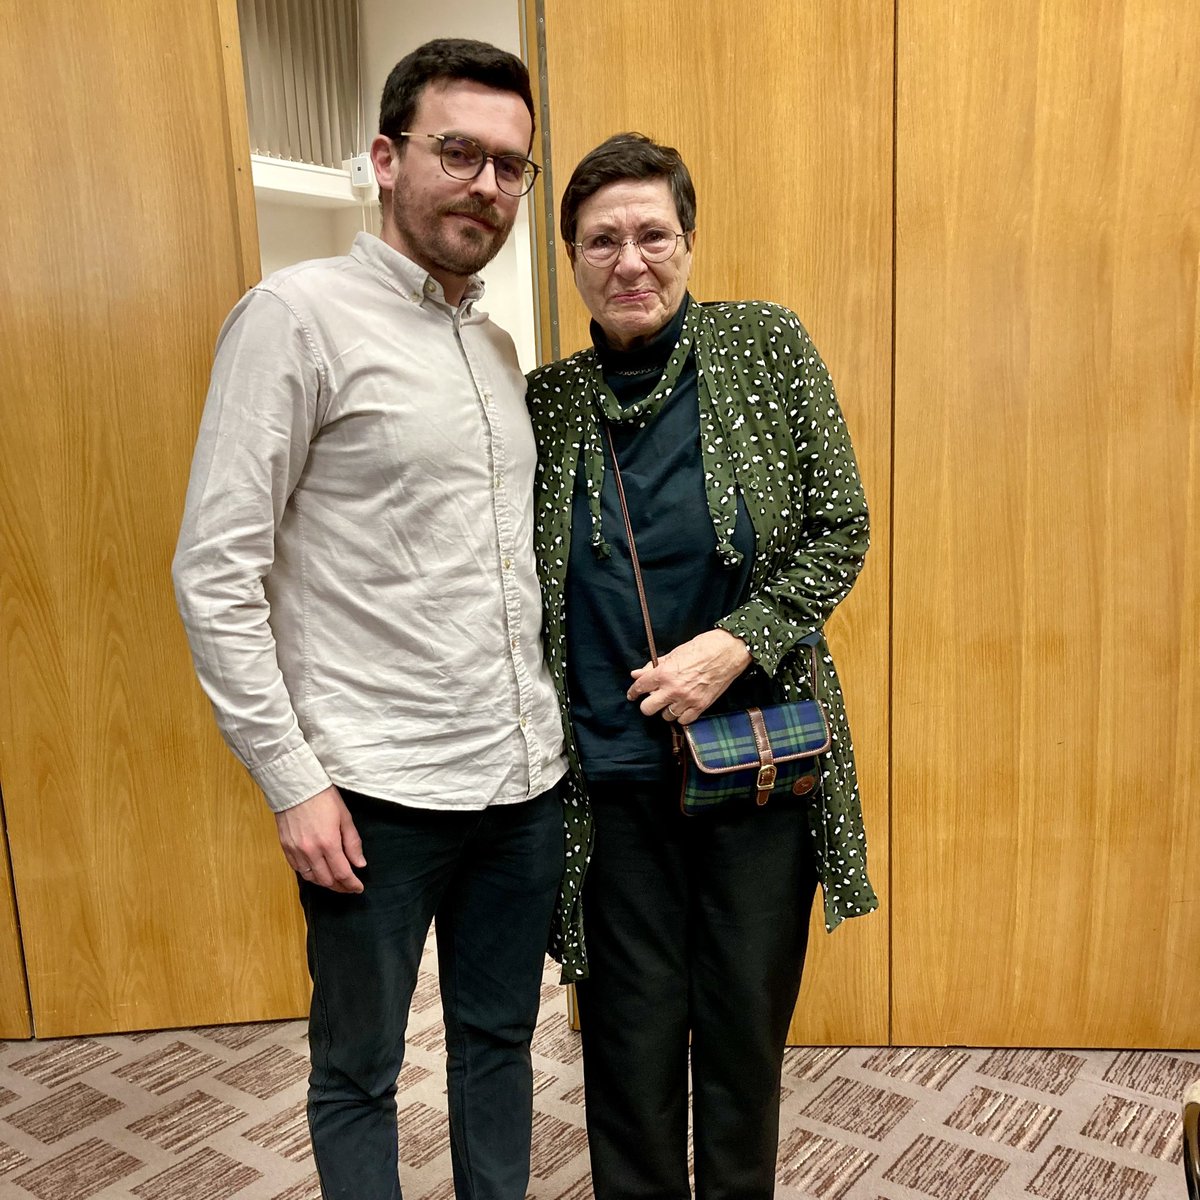 Last night, Alica Fruhwaldova & @SmajoBeso shared moving personal stories as 2nd-generation Holocaust survivor & Bosnian Genocide survivor (respectively) & reflected on the fragility of peace in a #DUGlobalWeek event organised by @durham_uni Chaplaincy Network & @StAidansCollege